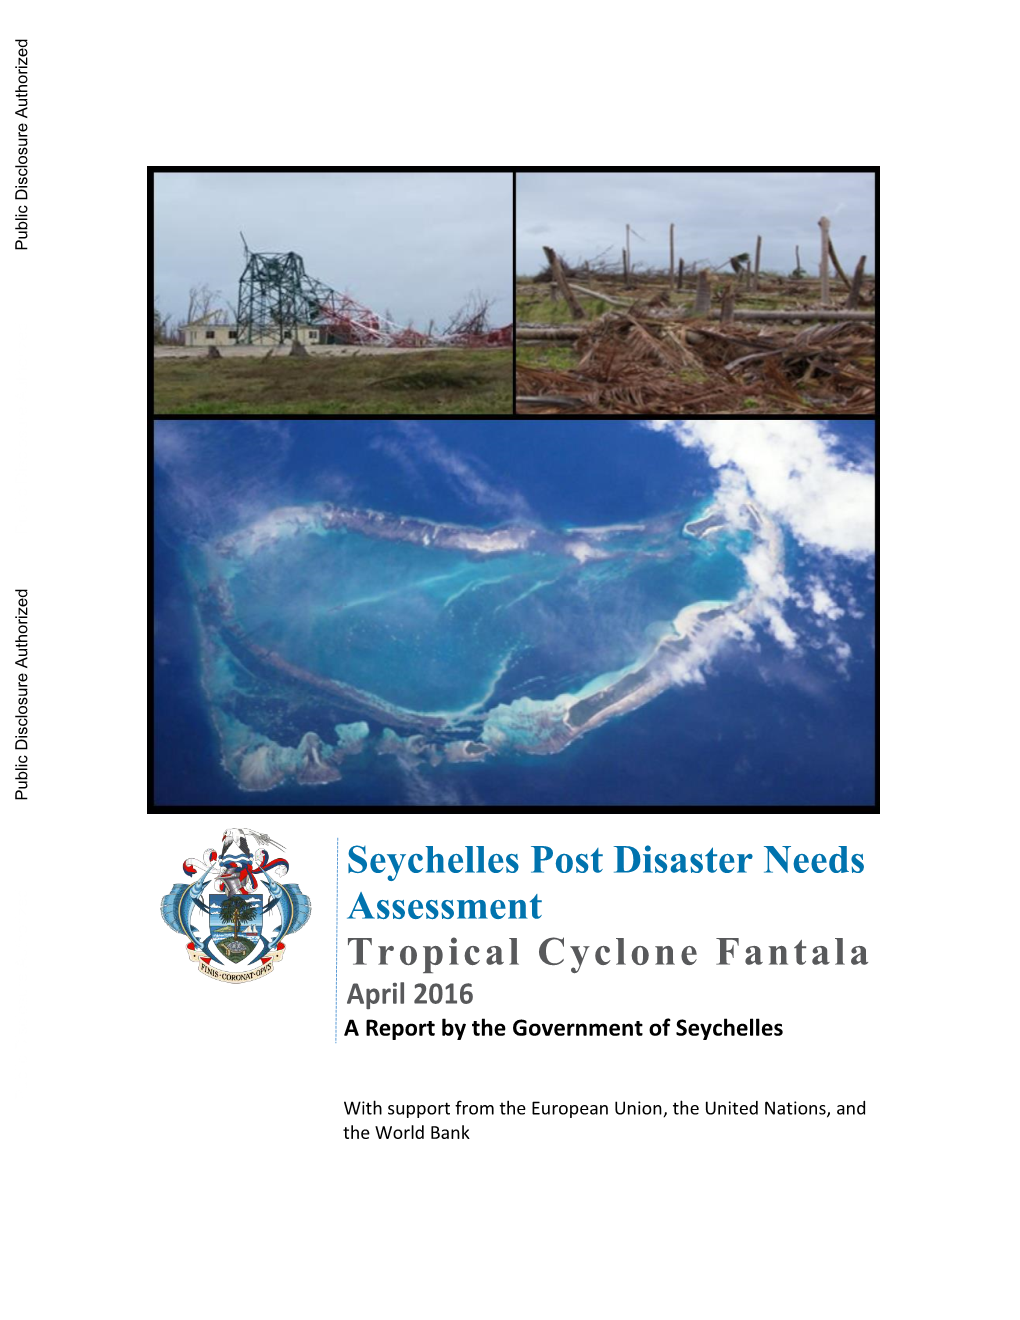 Annex 4. Impacts of Tropical Cyclone Fantala on the Atoll's Fauna ...59